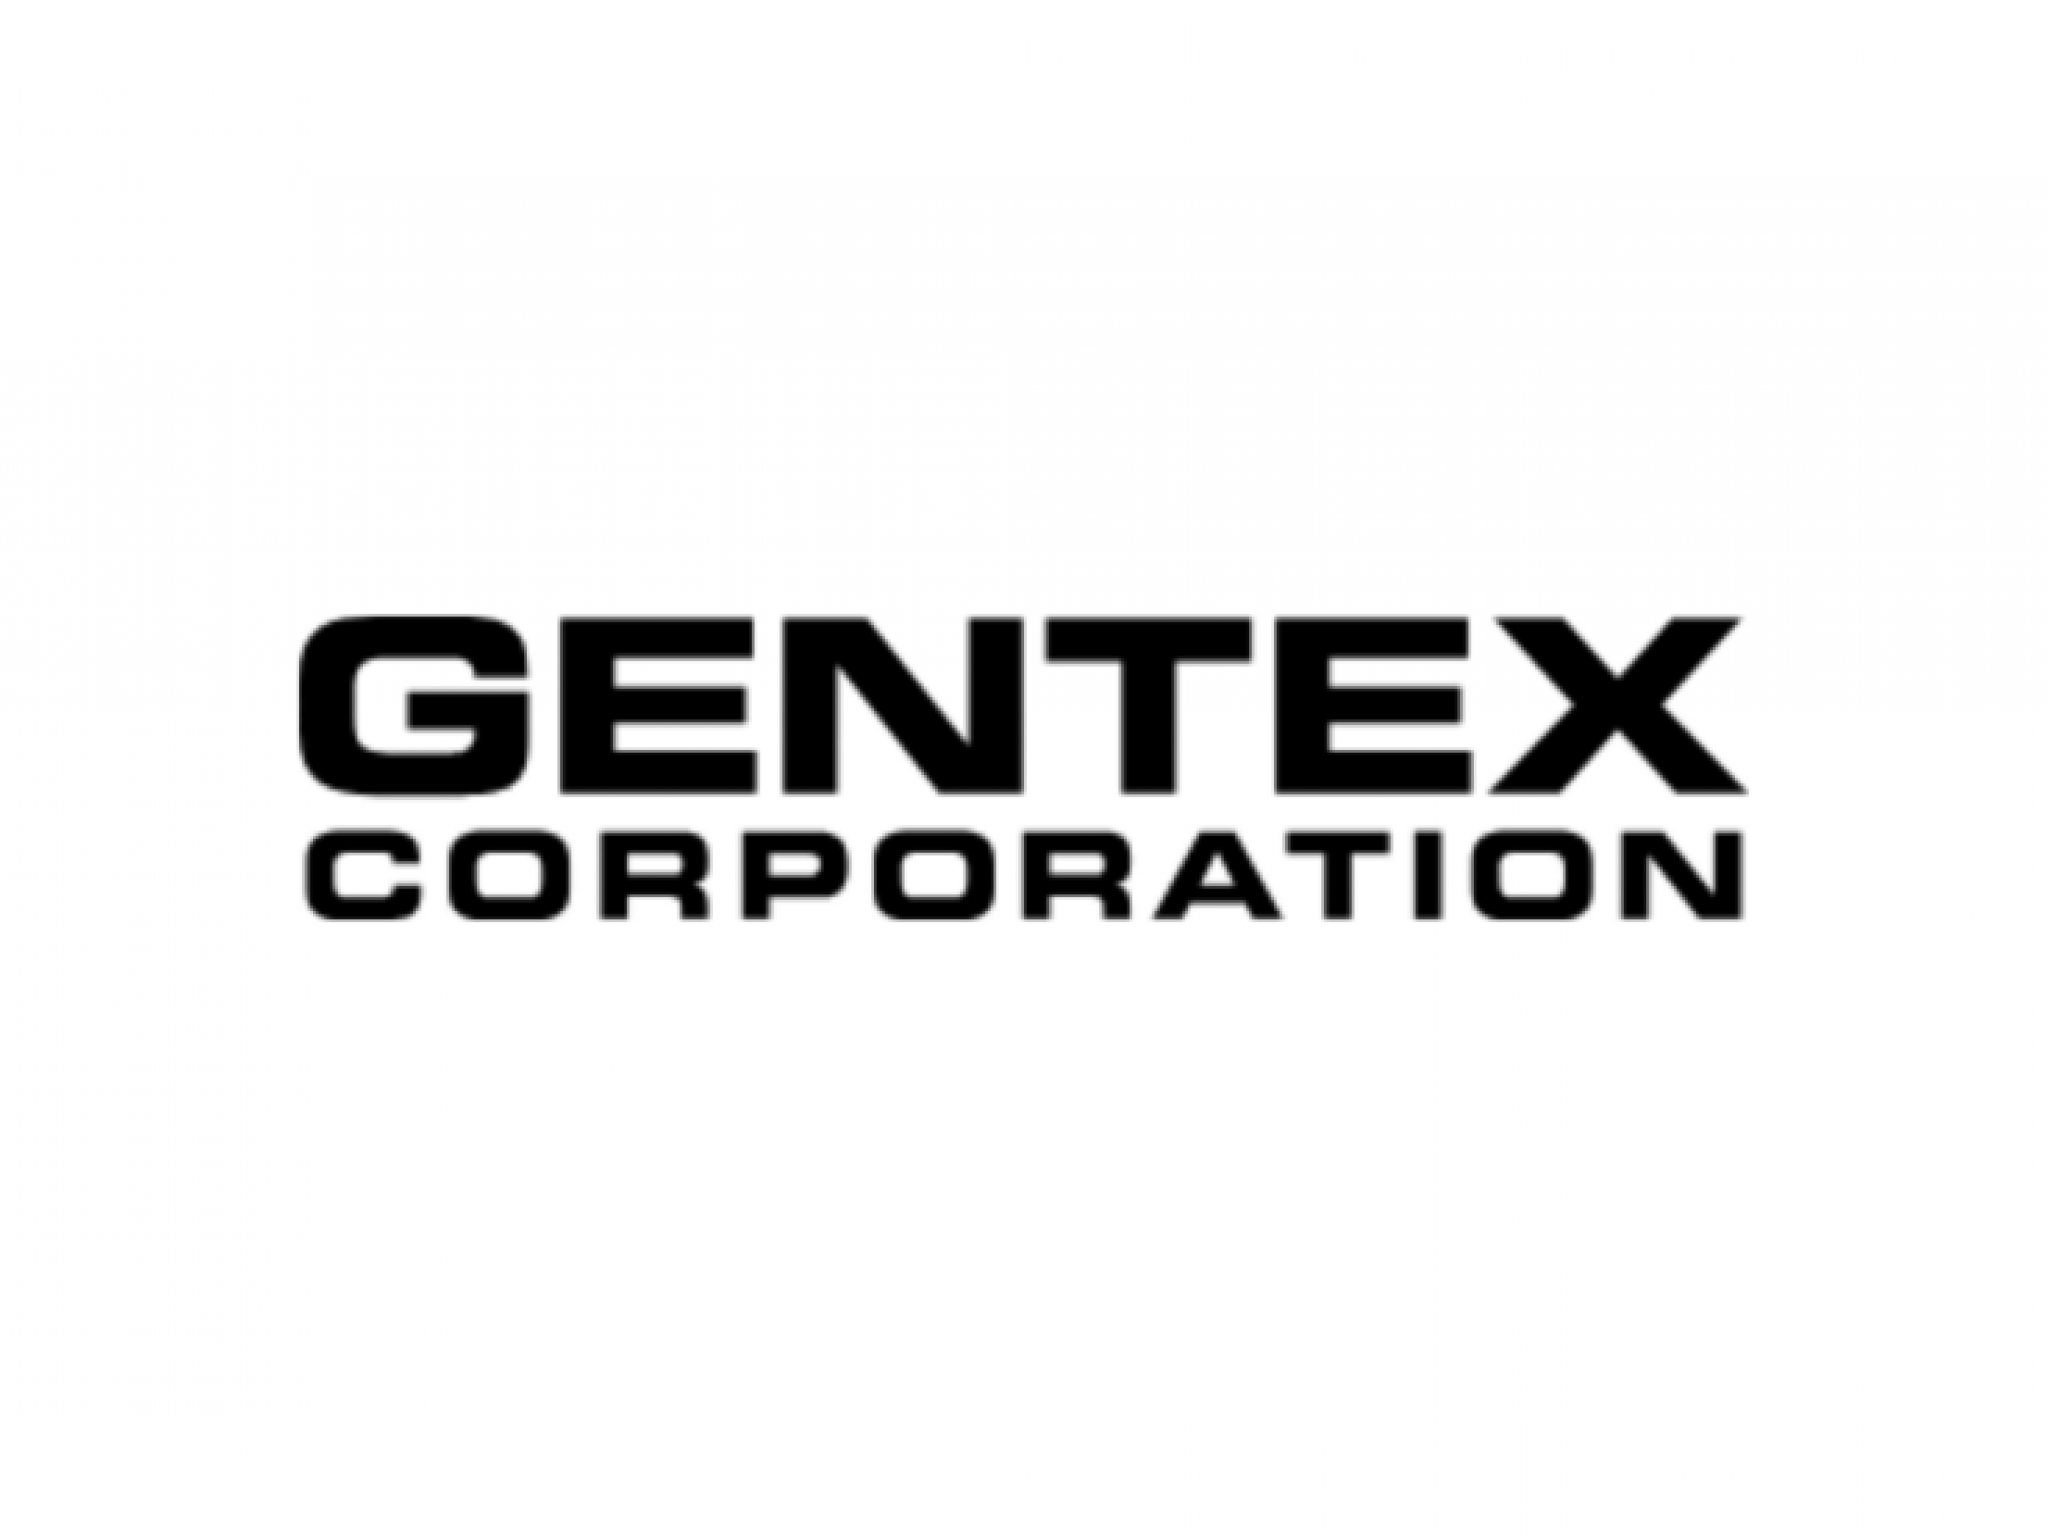  why-auto-component-maker-gentex-shares-are-seeing-blue-skies-today 